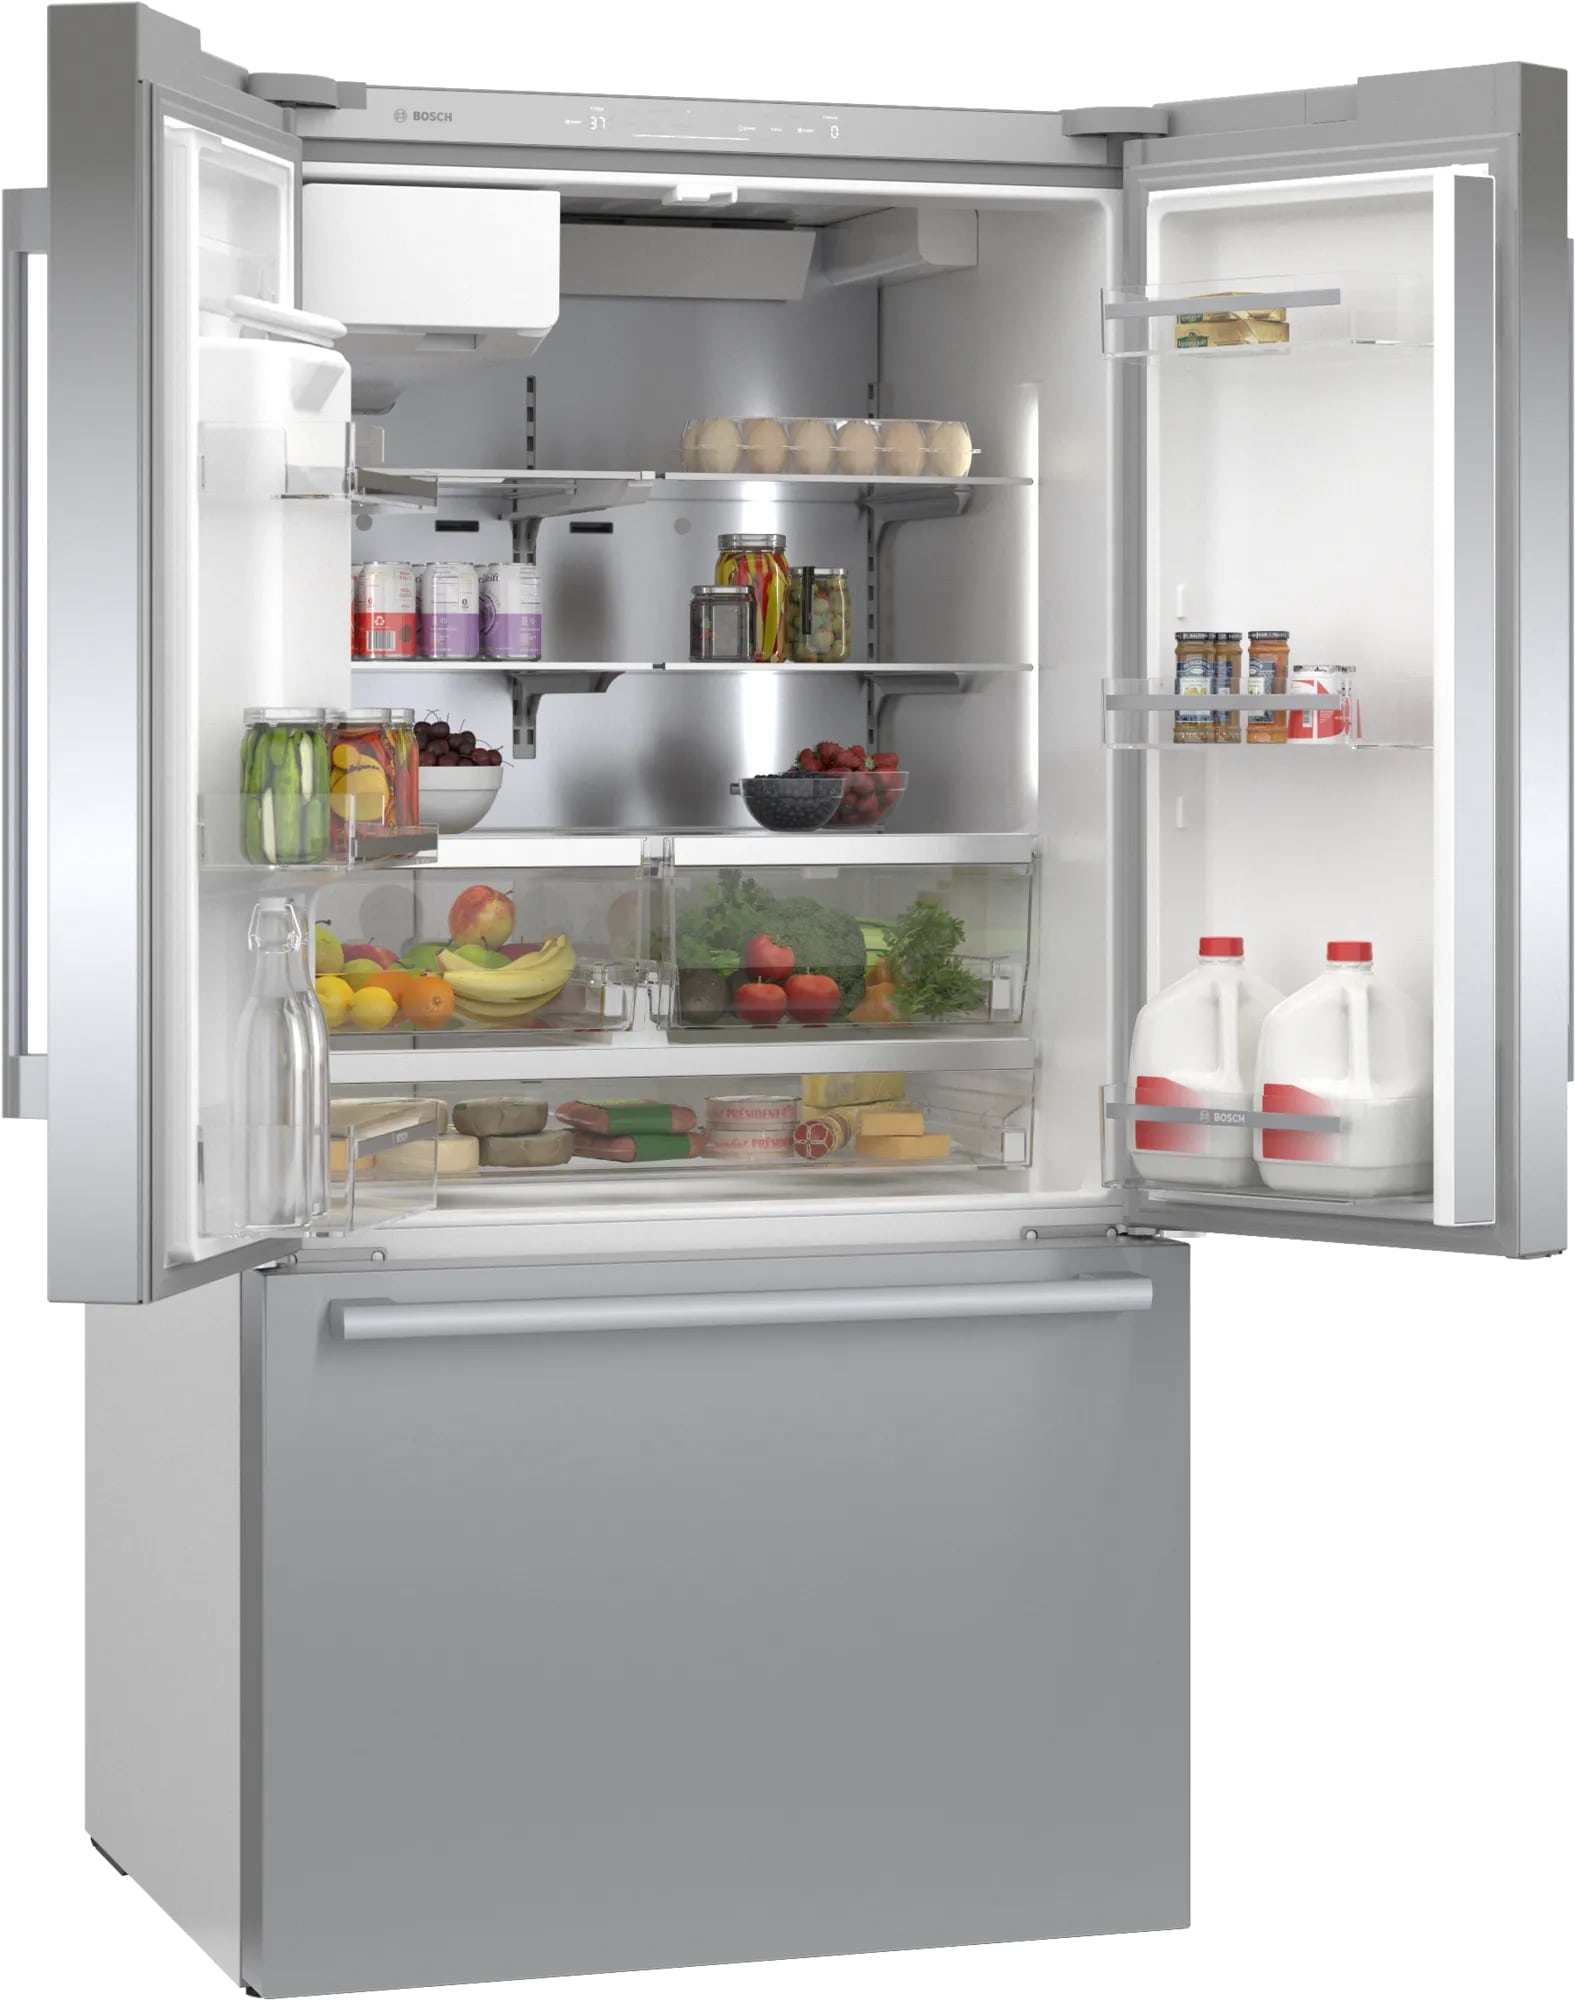 Bosch - 35.625 Inch 26 cu. ft French Door Refrigerator in Stainless - B36FD50SNS